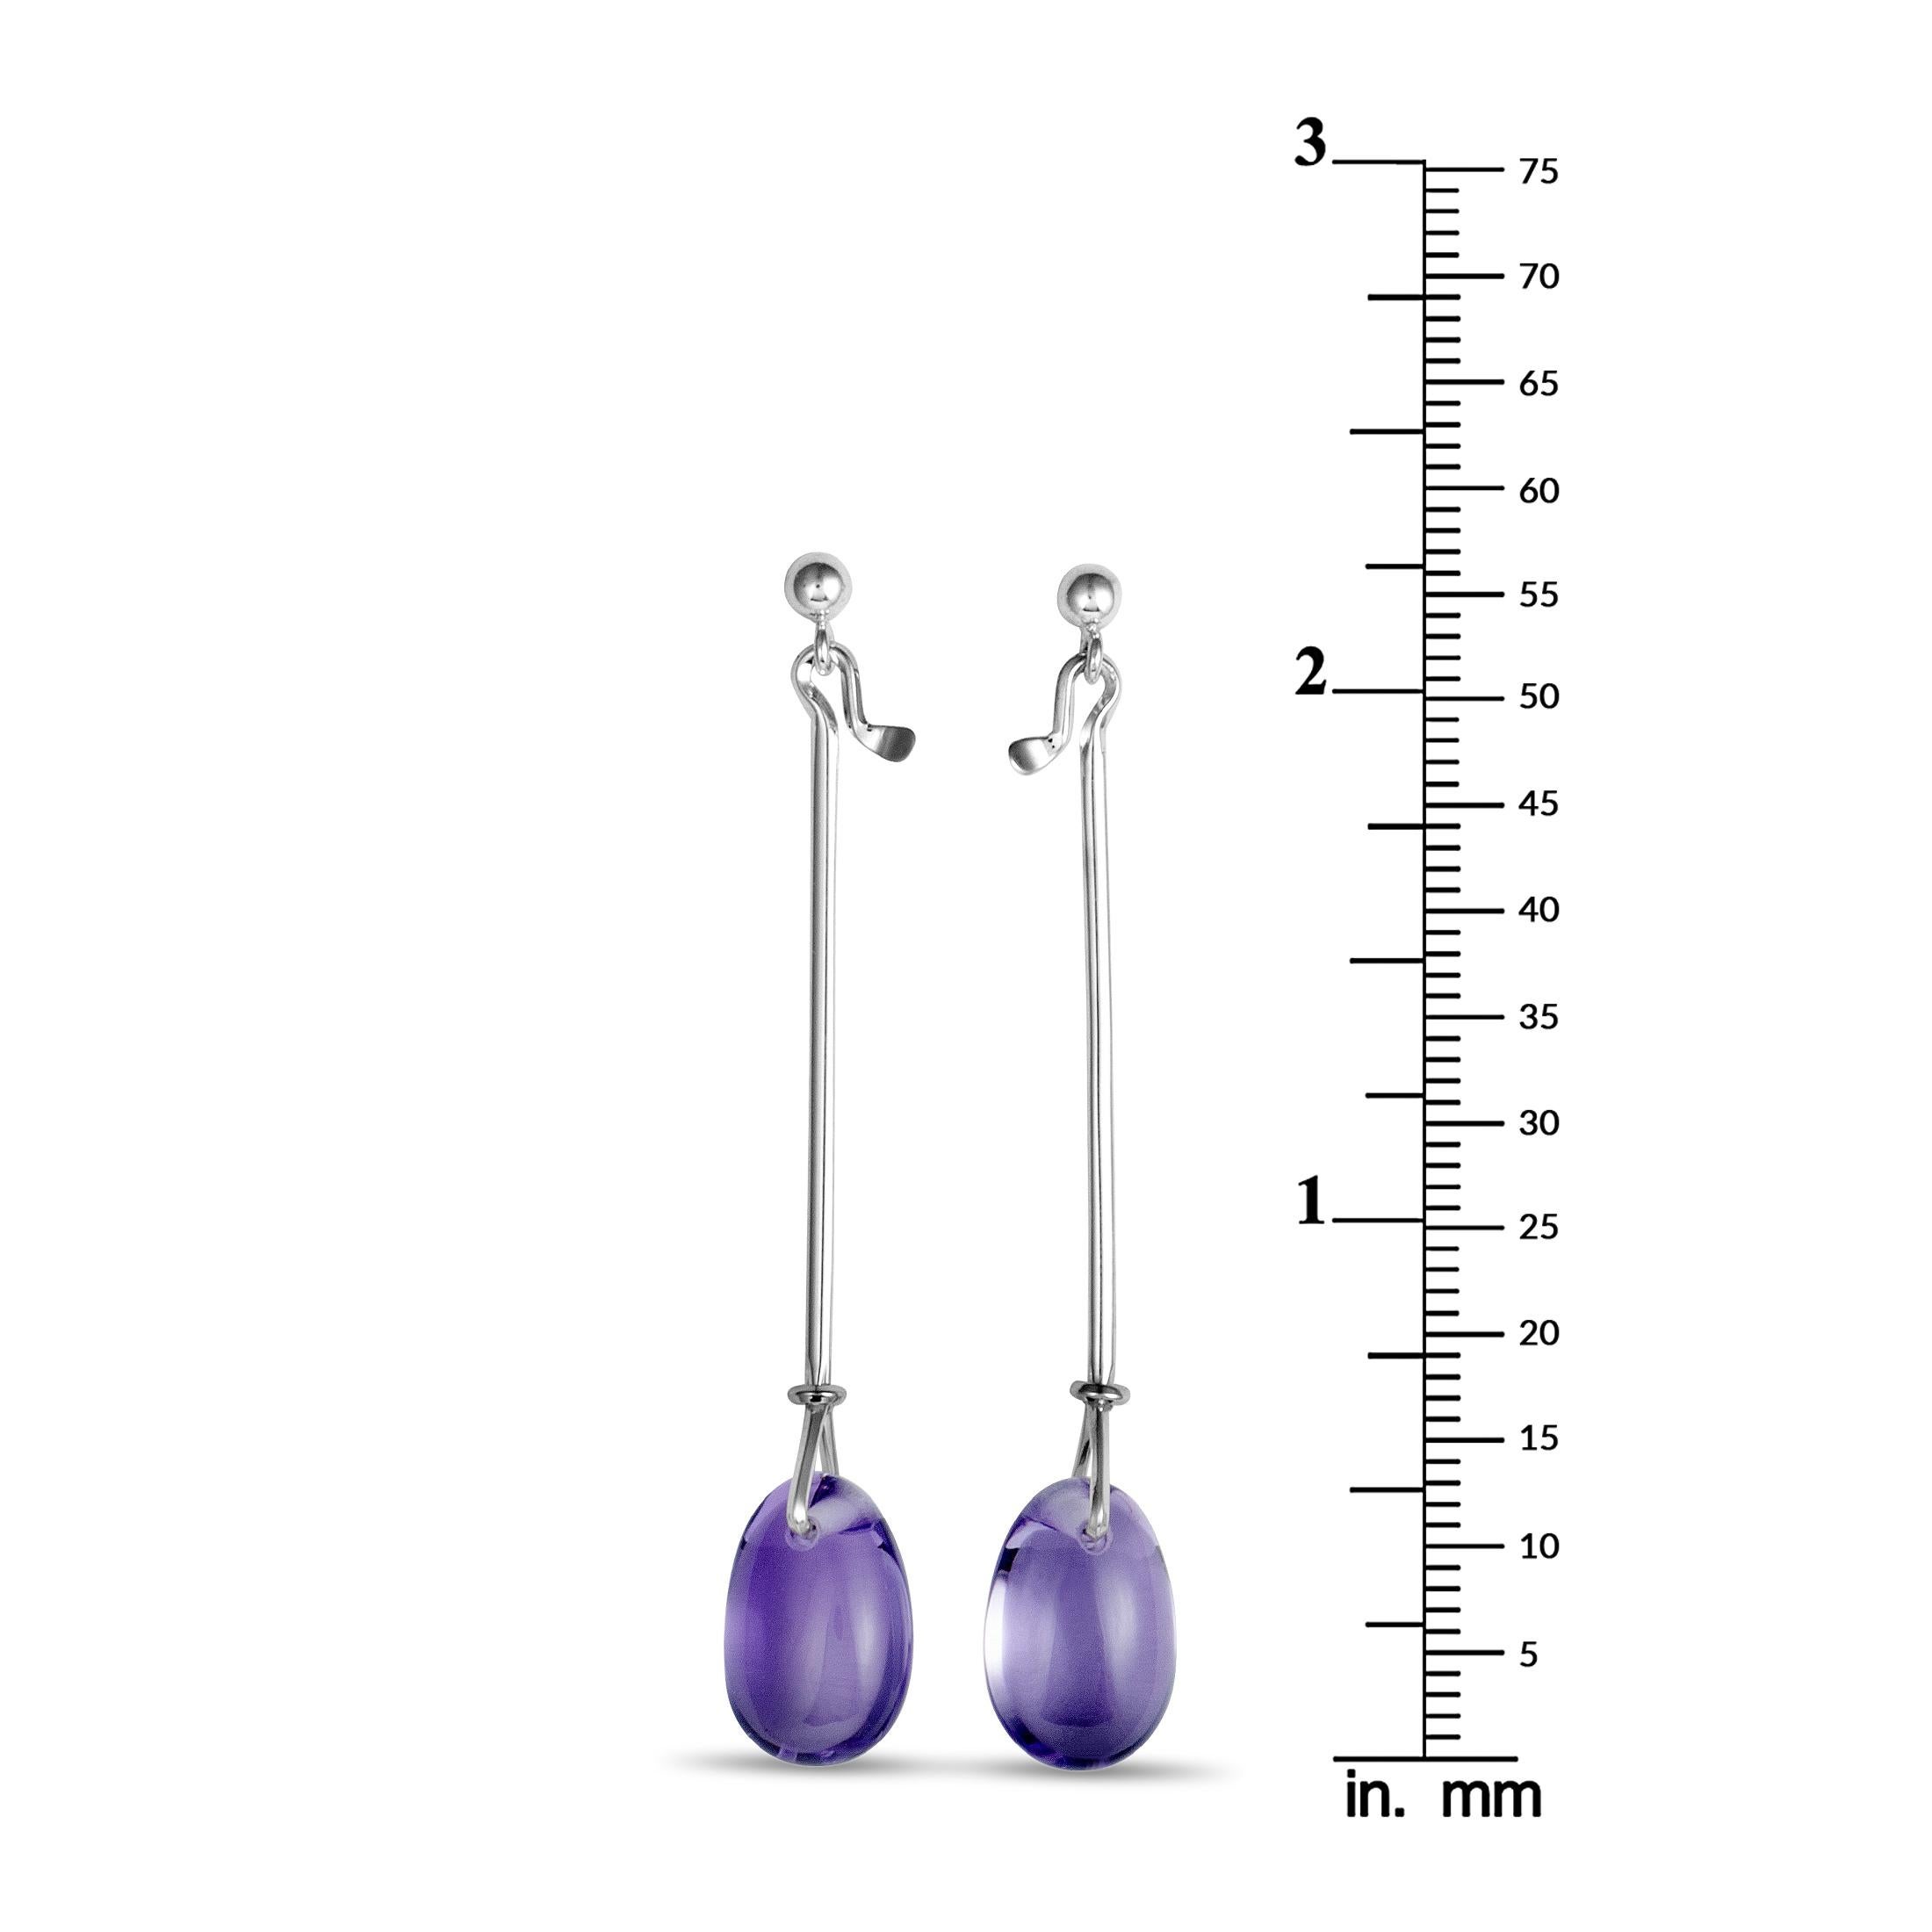 Accentuate your ensembles in a gorgeously feminine fashion with these lovely earrings from Georg Jensen that boast elegant design topped off with enticing amethysts. The pair is beautifully made of silver and each of the two earrings weighs 2.9